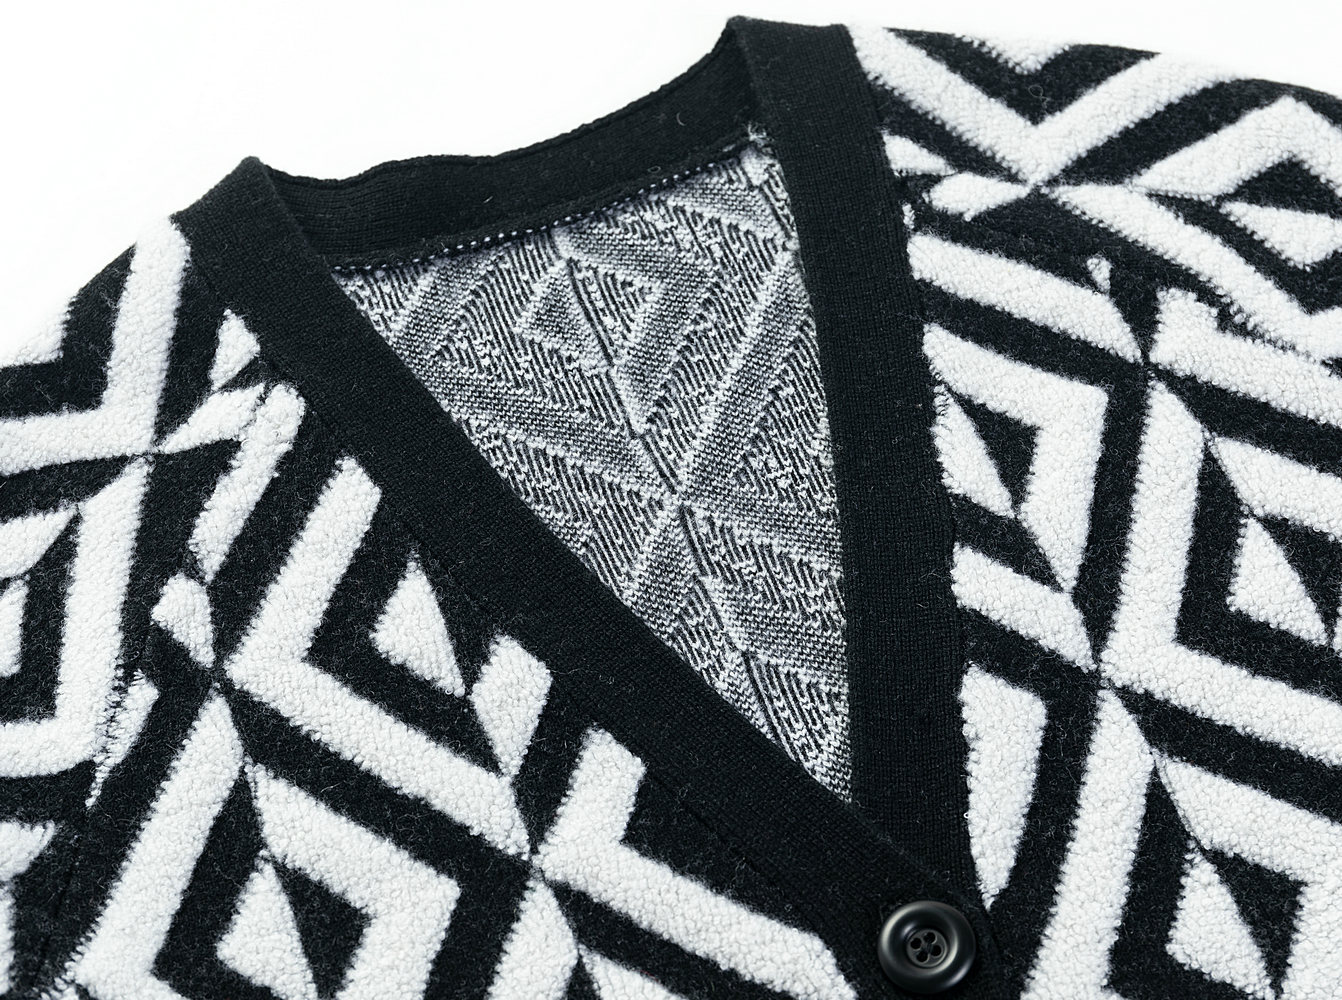 21114 WOMEN’S CARDIGAN KNITTED V NECK LONG SLEEVE BLACK AND WHITE ZIGZAG JACQUARD WITH BUTTONS MOQ 200PCS/COLOR